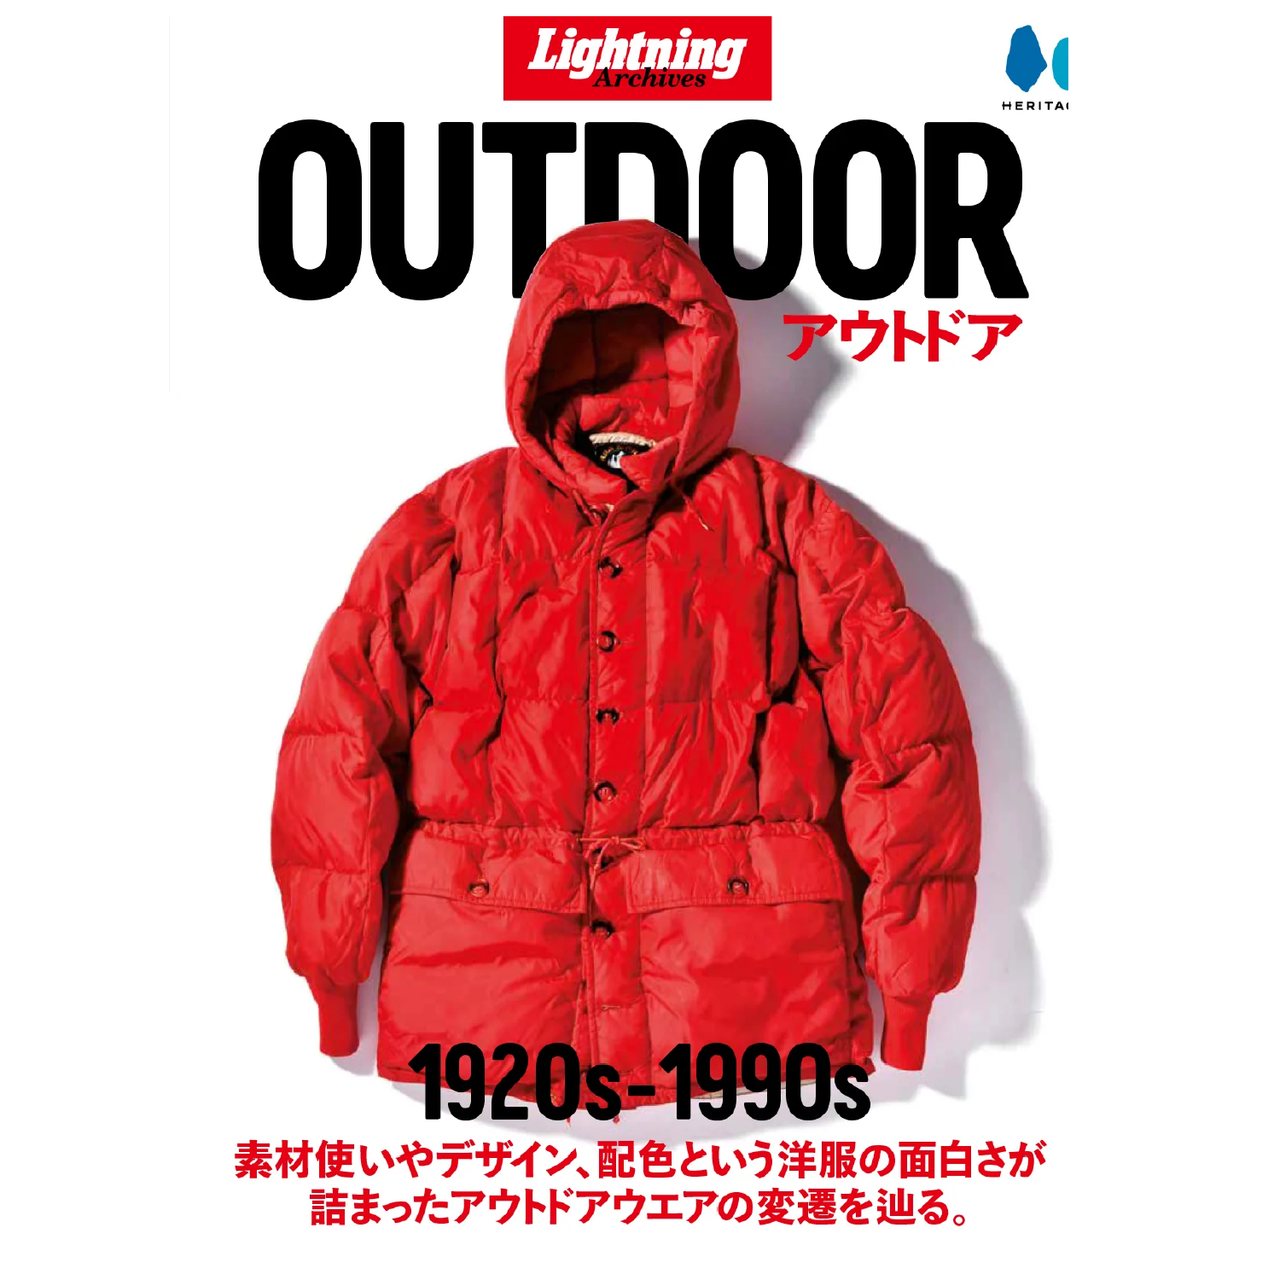 Lightning Archives "OUTDOOR"-Magazine-Clutch Cafe